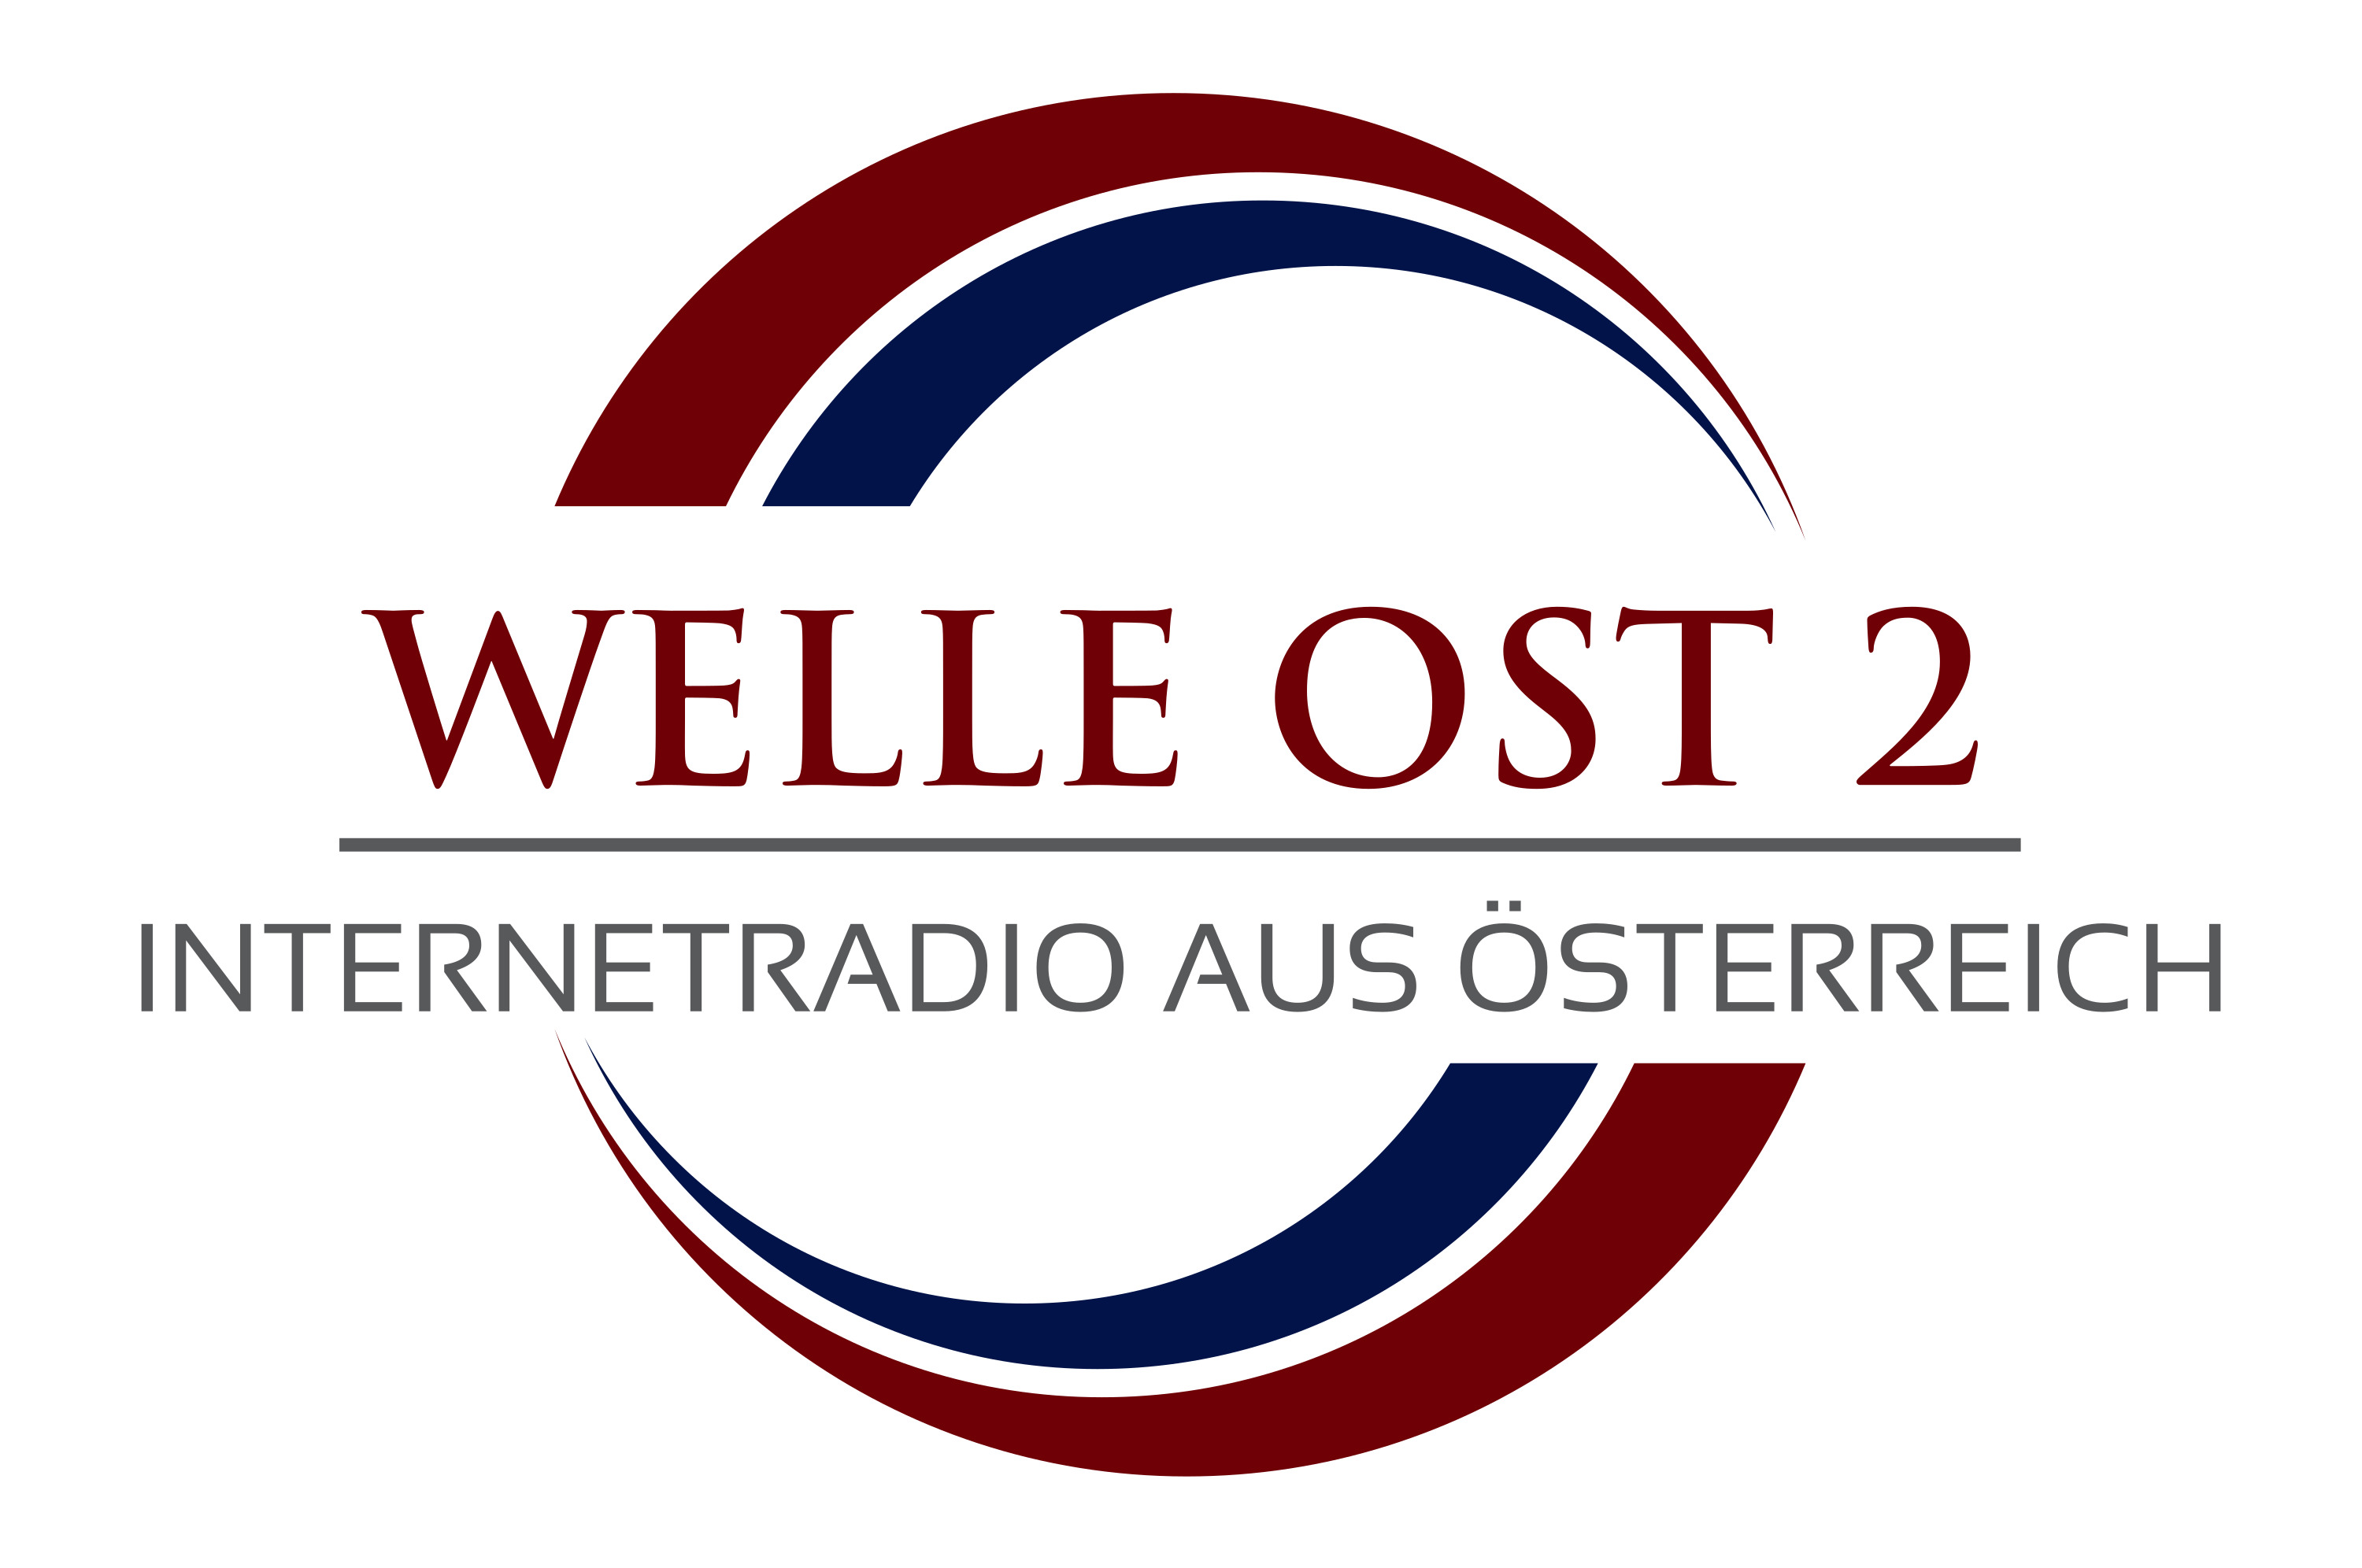 Welle Ost 2 